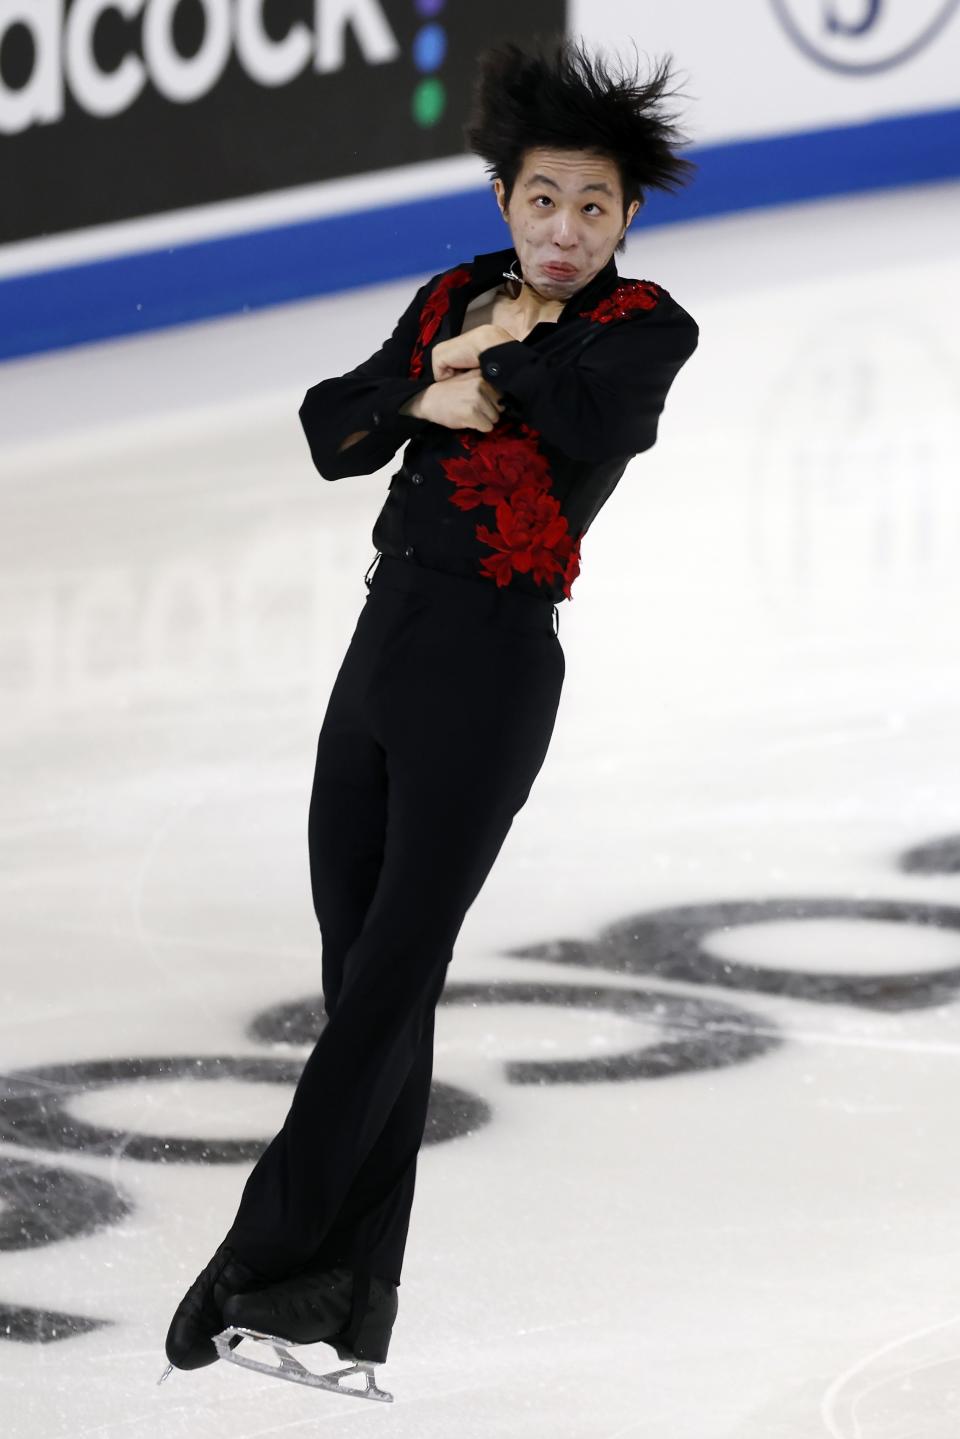 Kao Miura performs in the men's short program during the Grand Prix Skate America Series, Friday, Oct. 21, 2022, in Norwood, Mass. (AP Photo/Michael Dwyer)